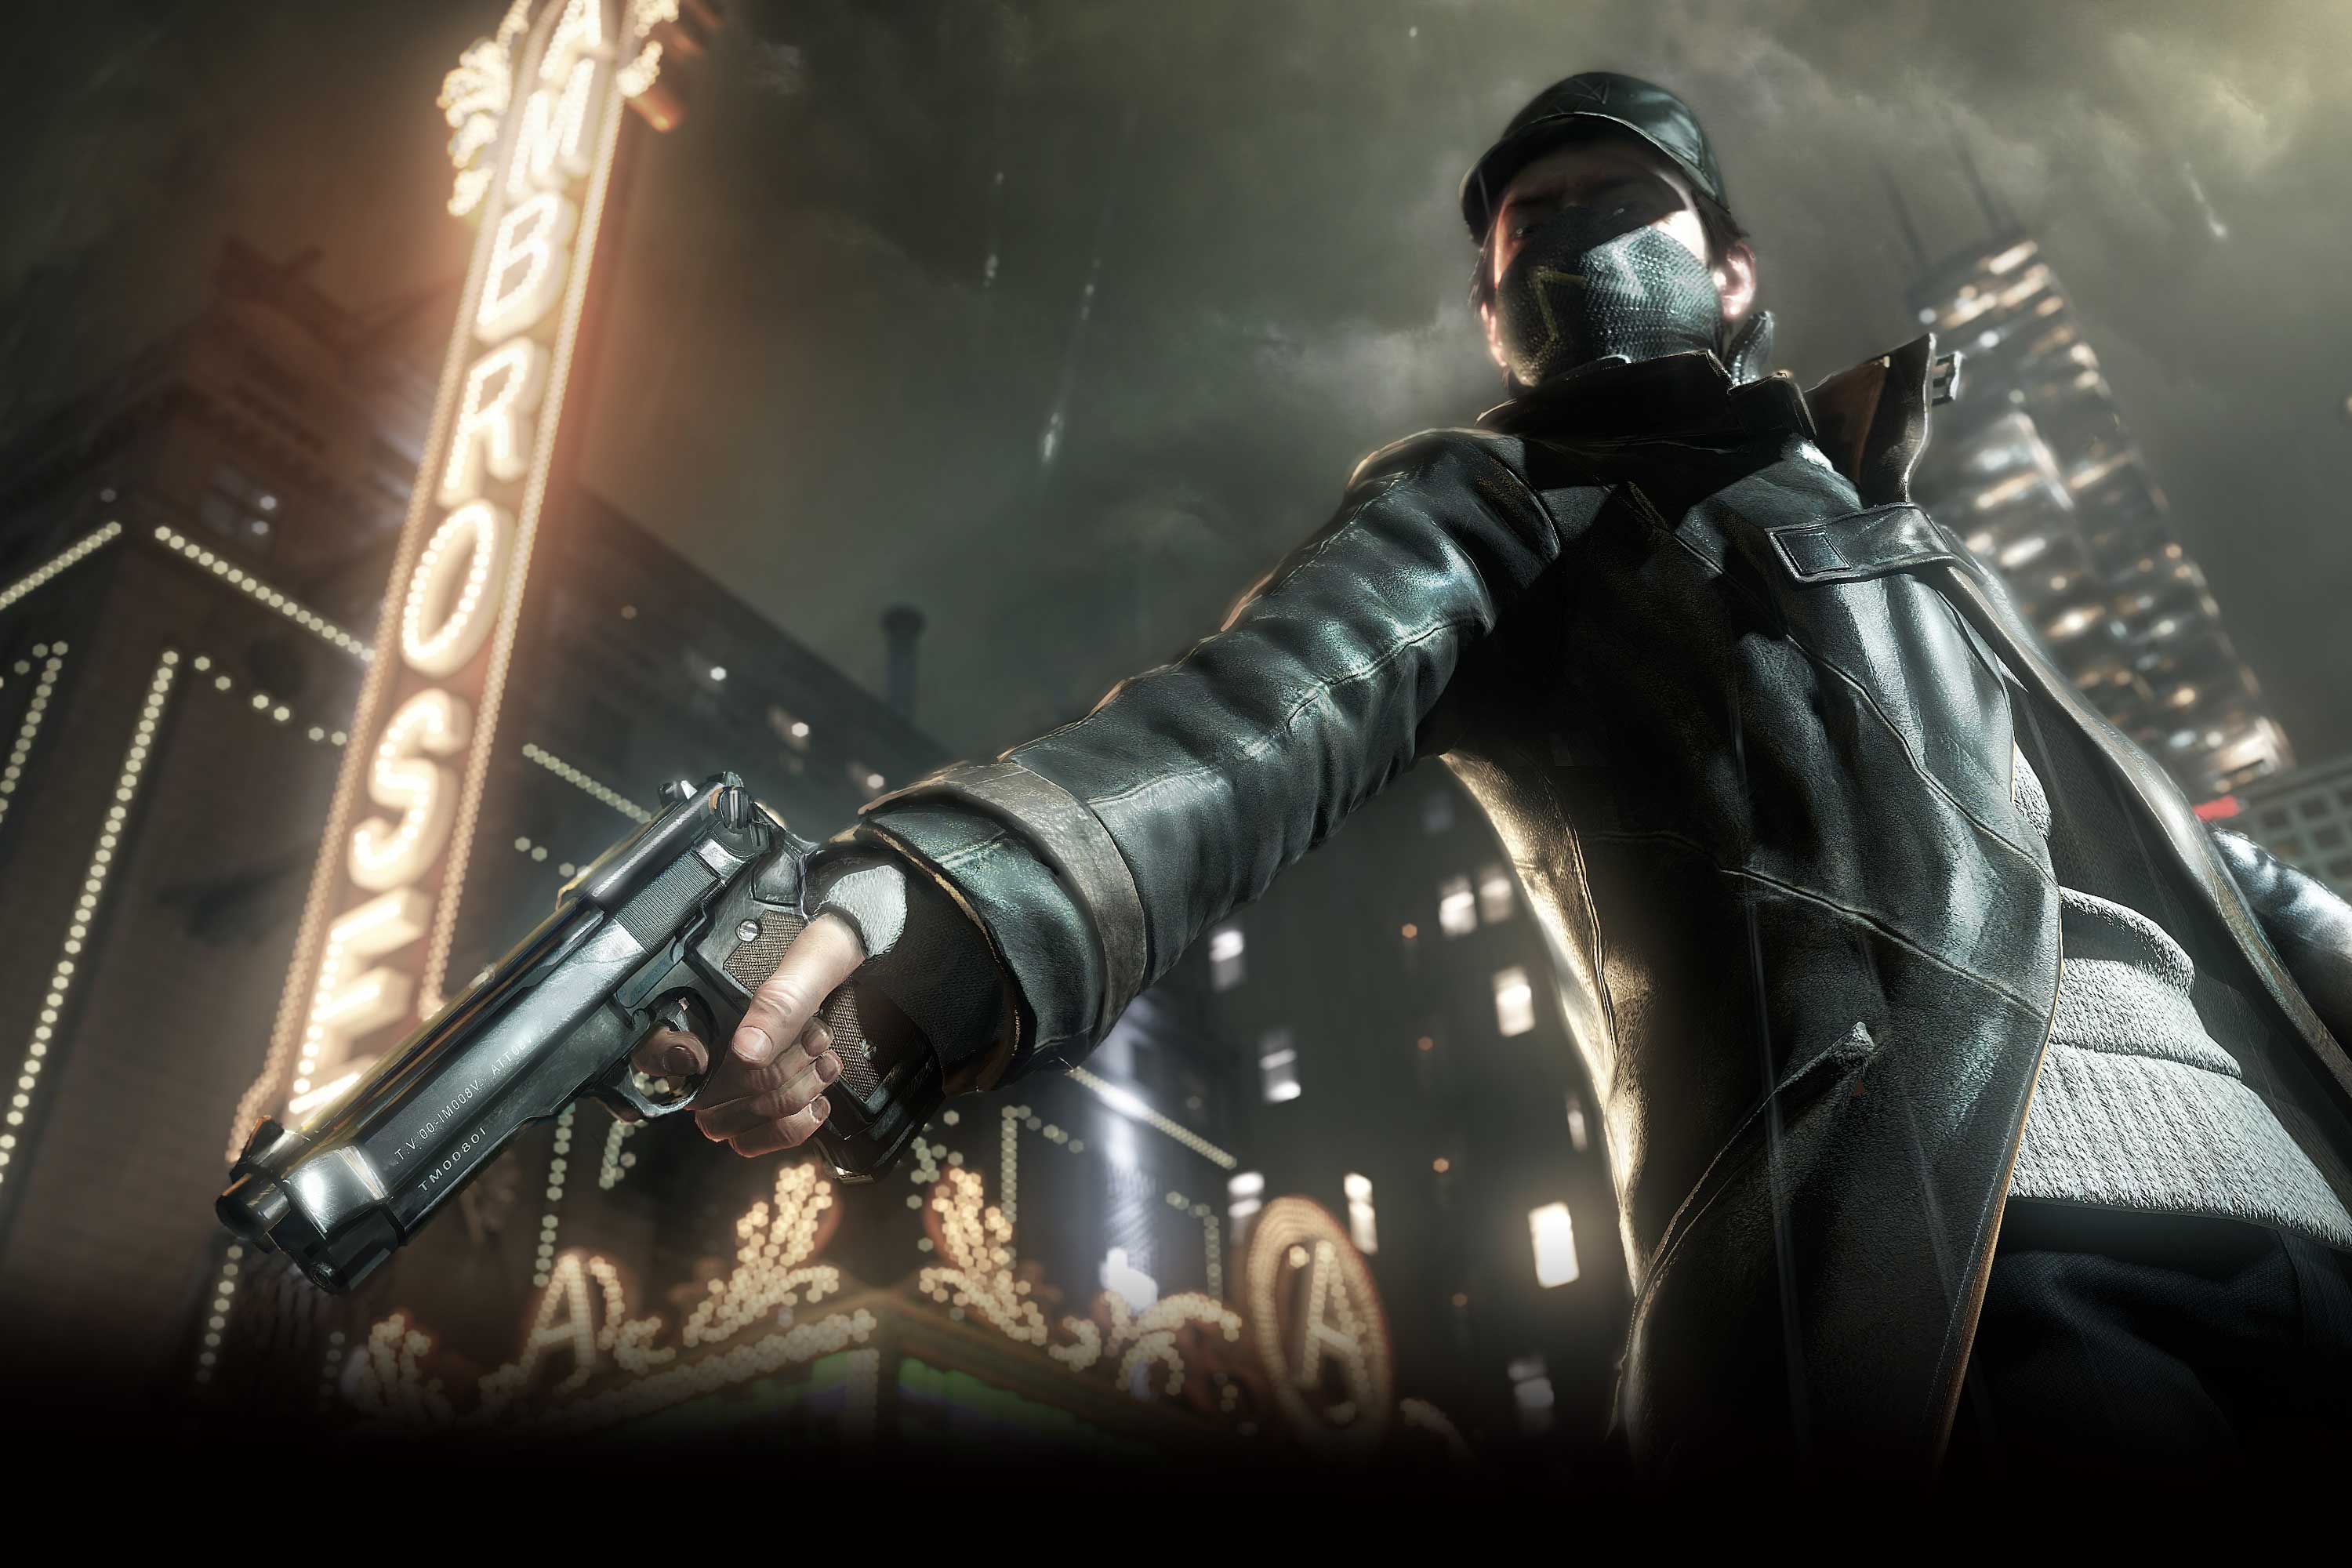 Geek insider, geekinsider, geekinsider. Com,, watch dogs review: all bark and a little bite, gaming